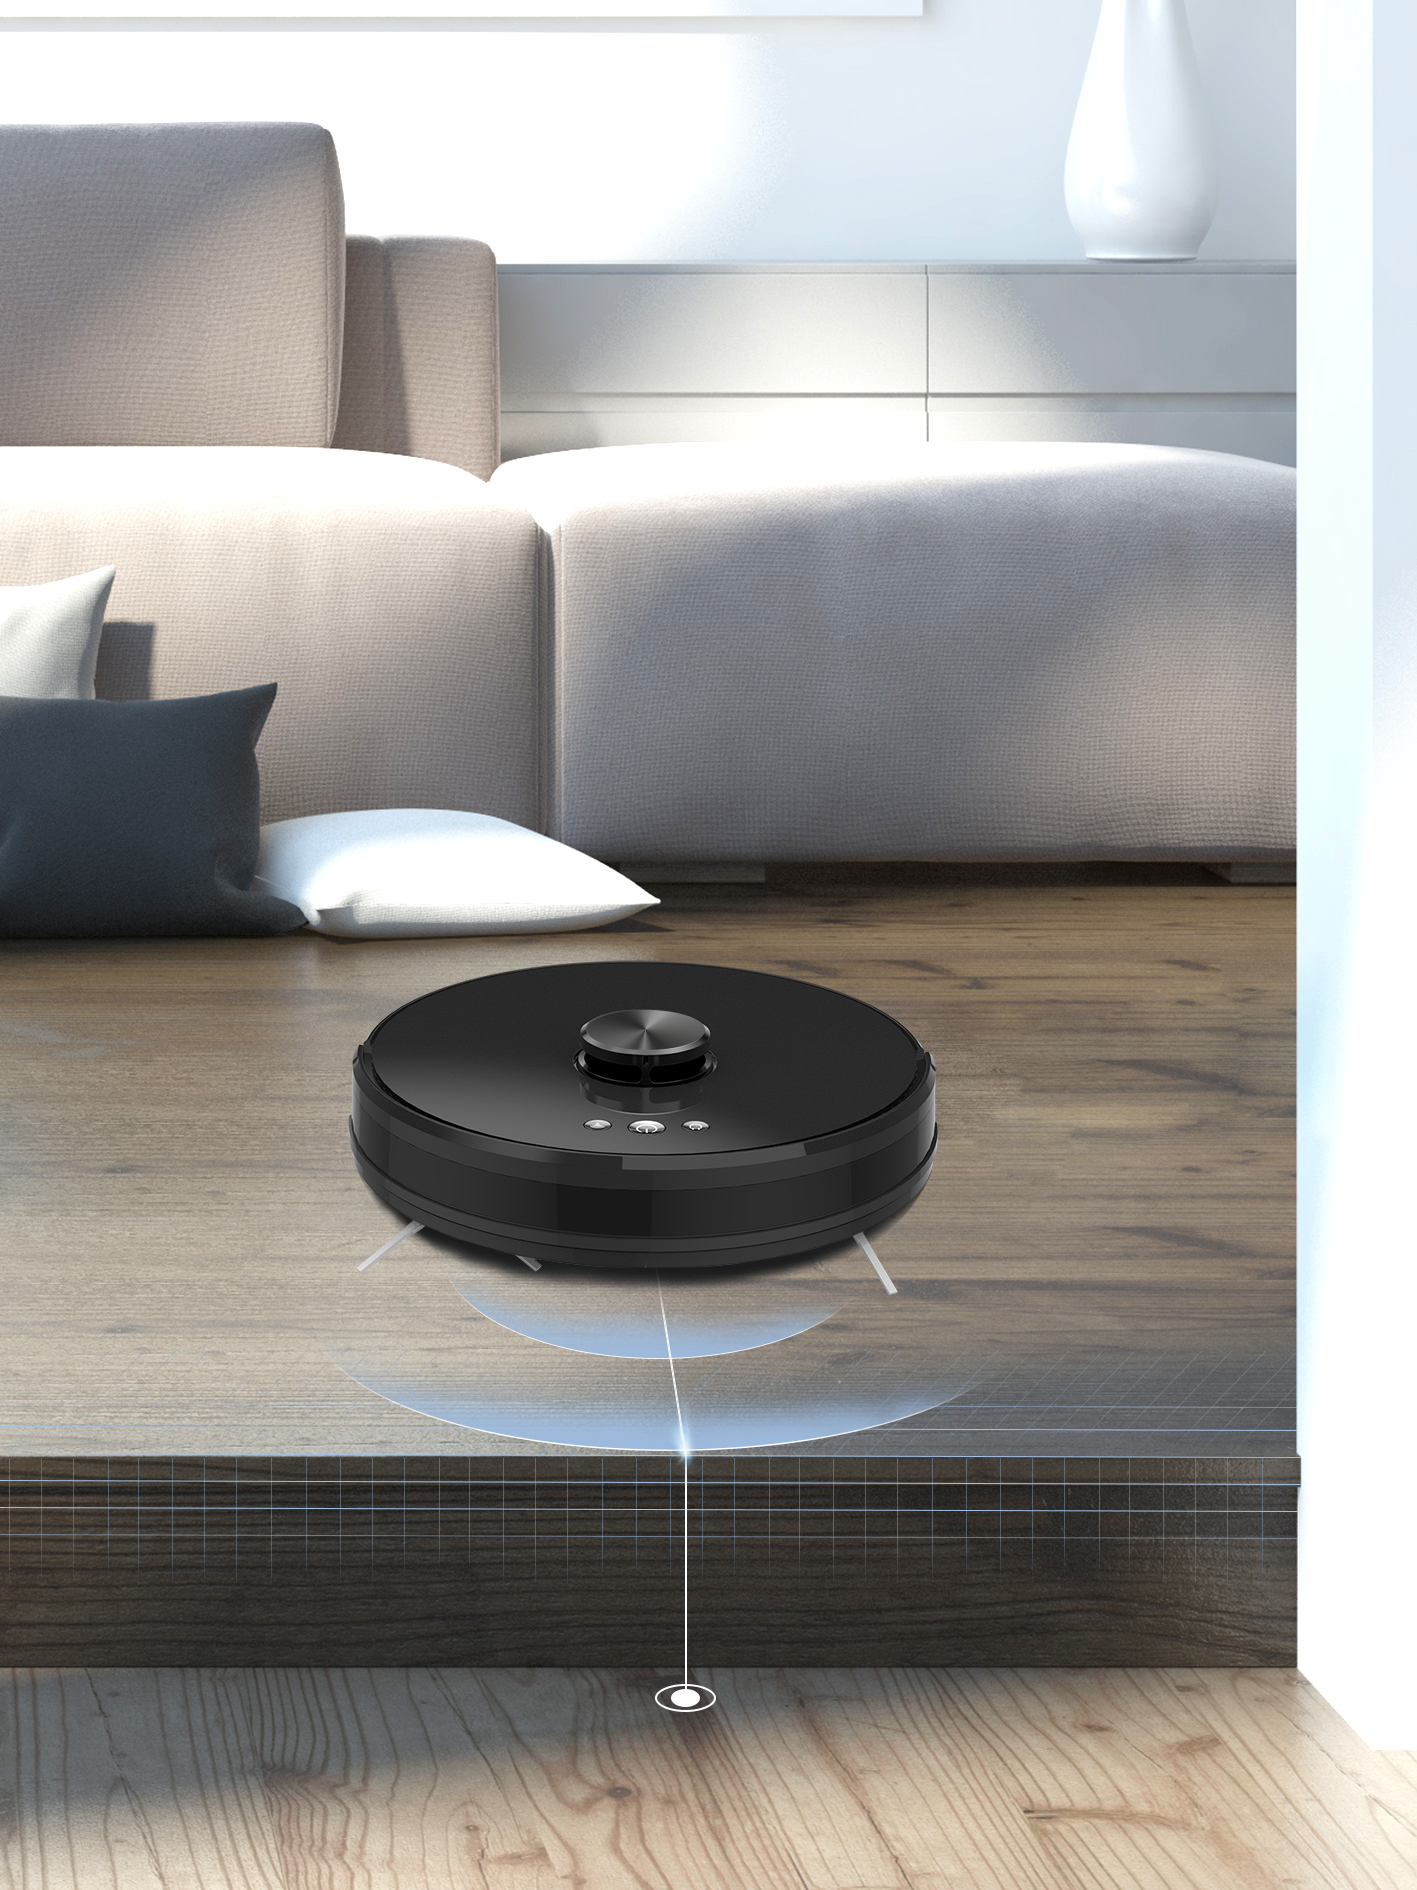 Robot Vacuum For Carpet And Hardwood Floors with Advanced High-end Navigation Features